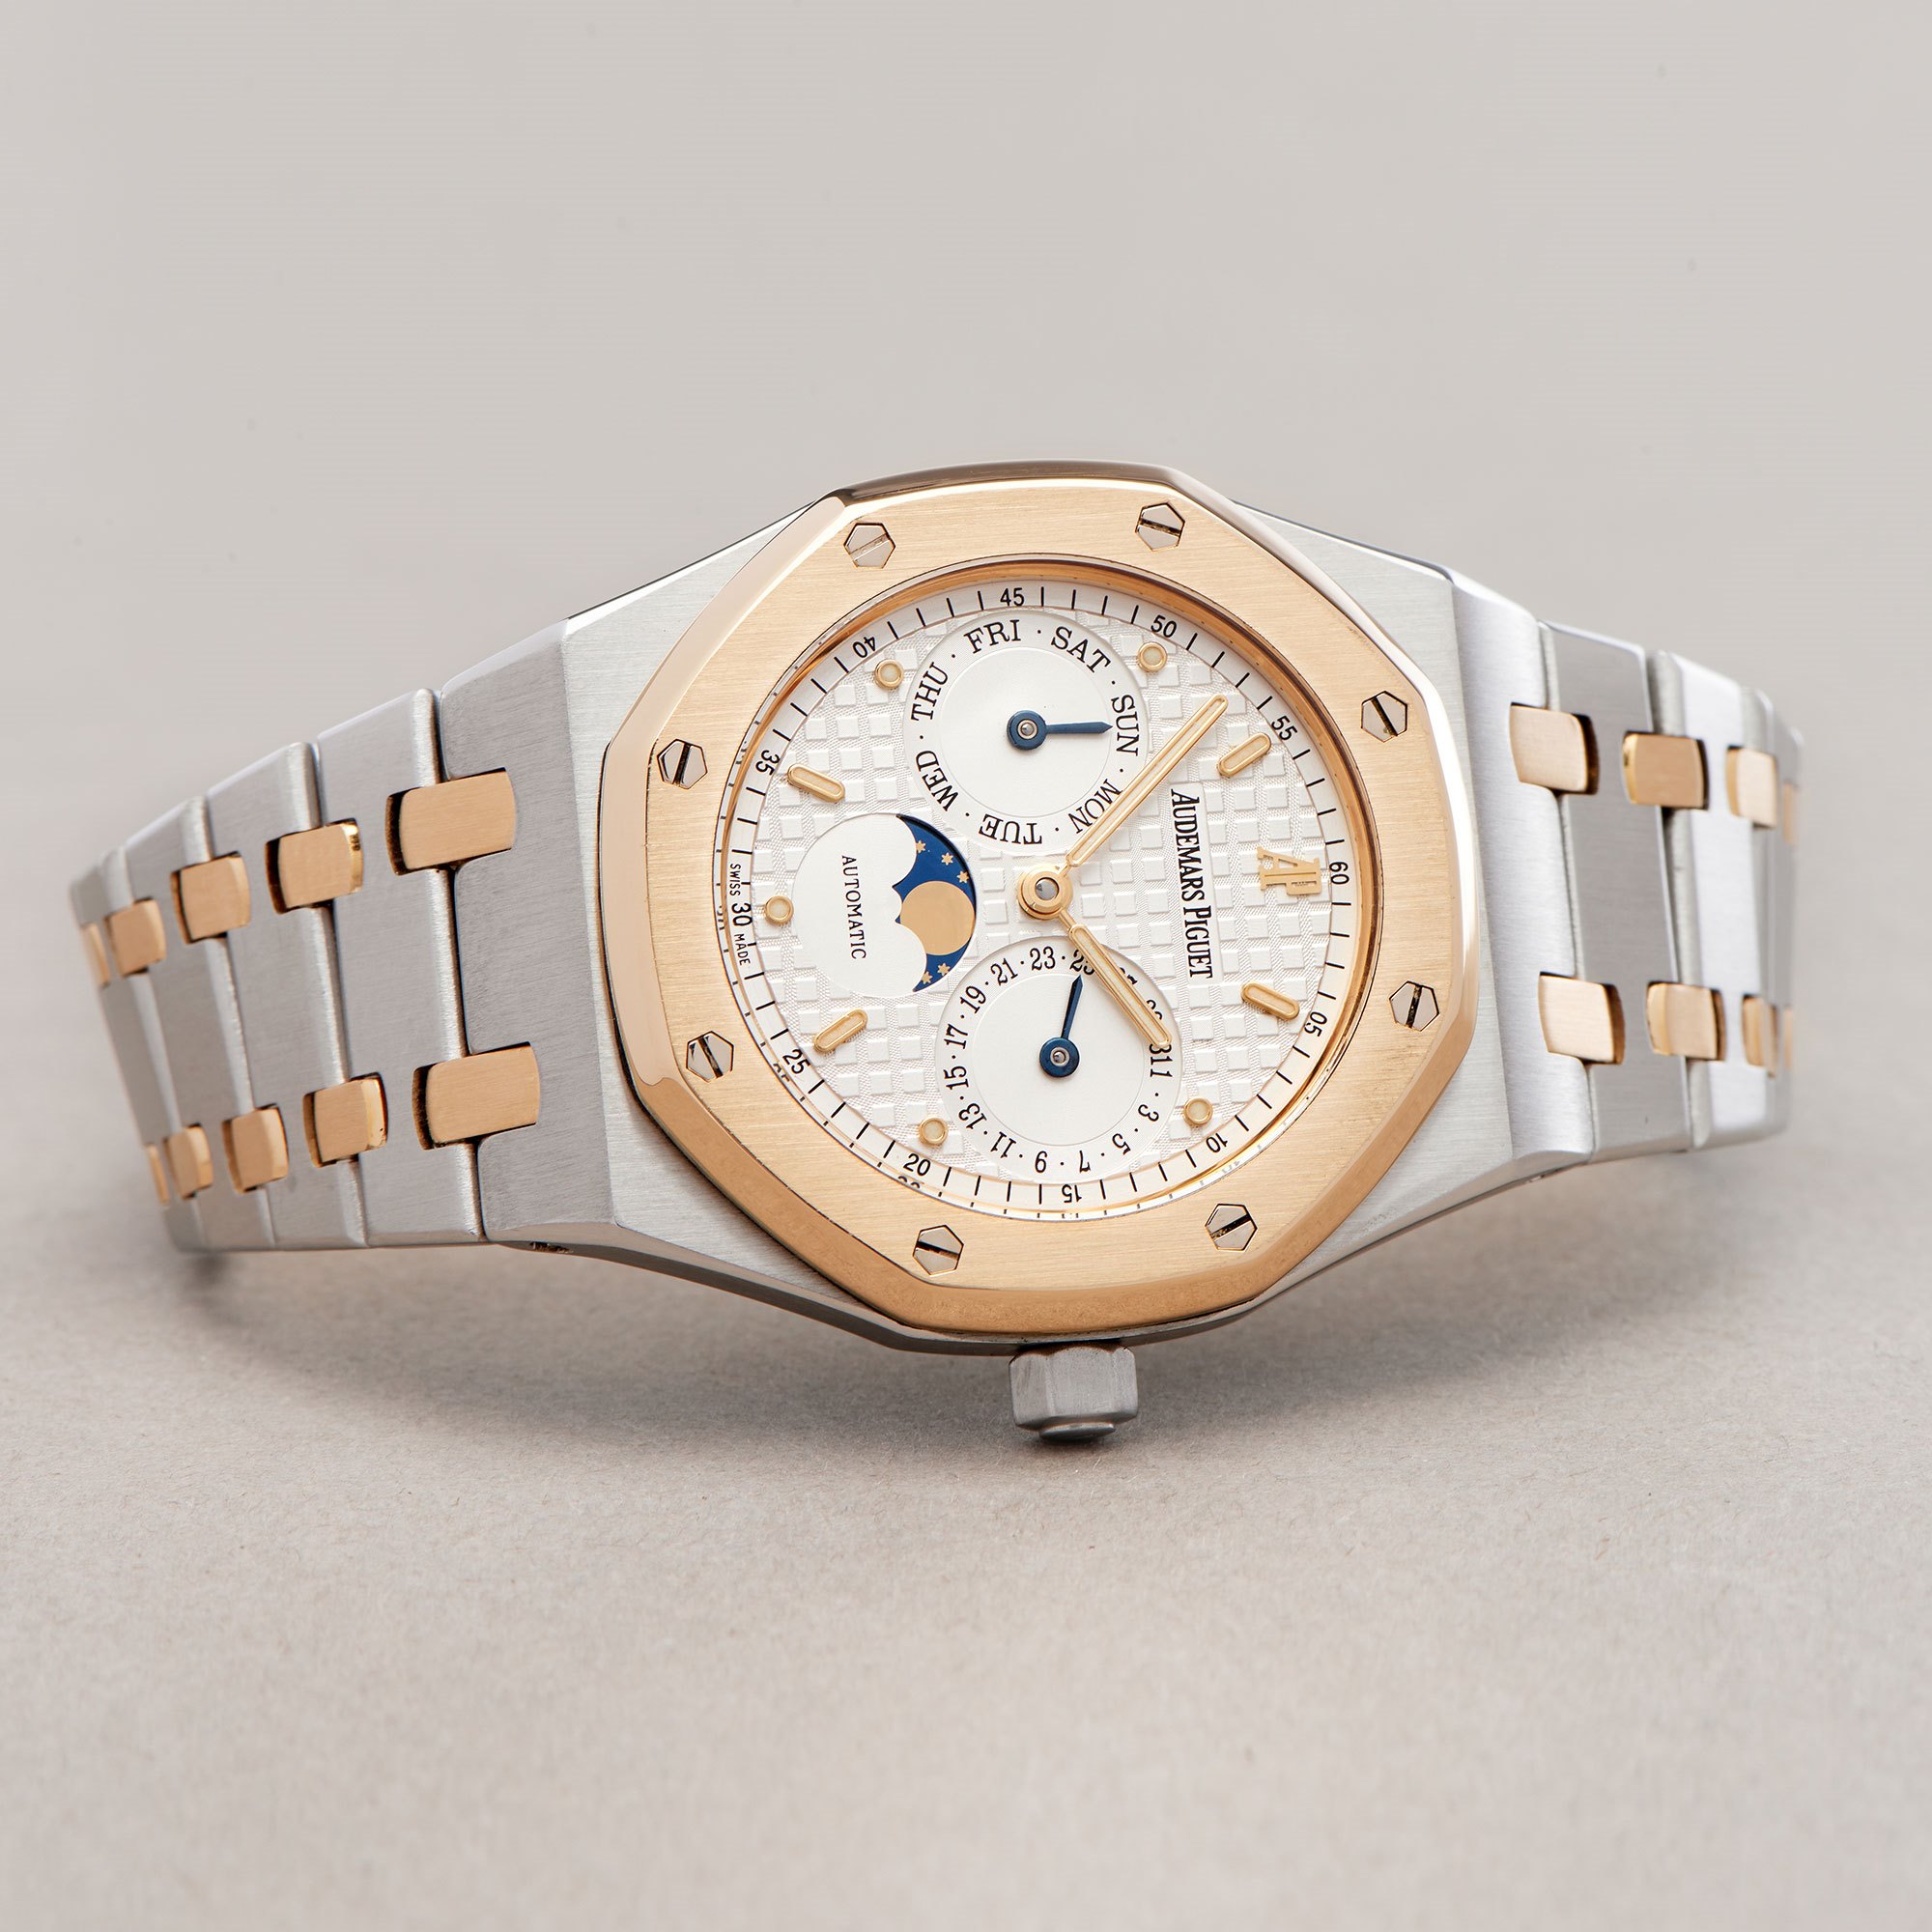 Audemars Piguet Royal Oak Day-Date 18K Yellow Gold & Stainless Steel Watch 25594SA.OO.0789SA.06 - Image 5 of 10